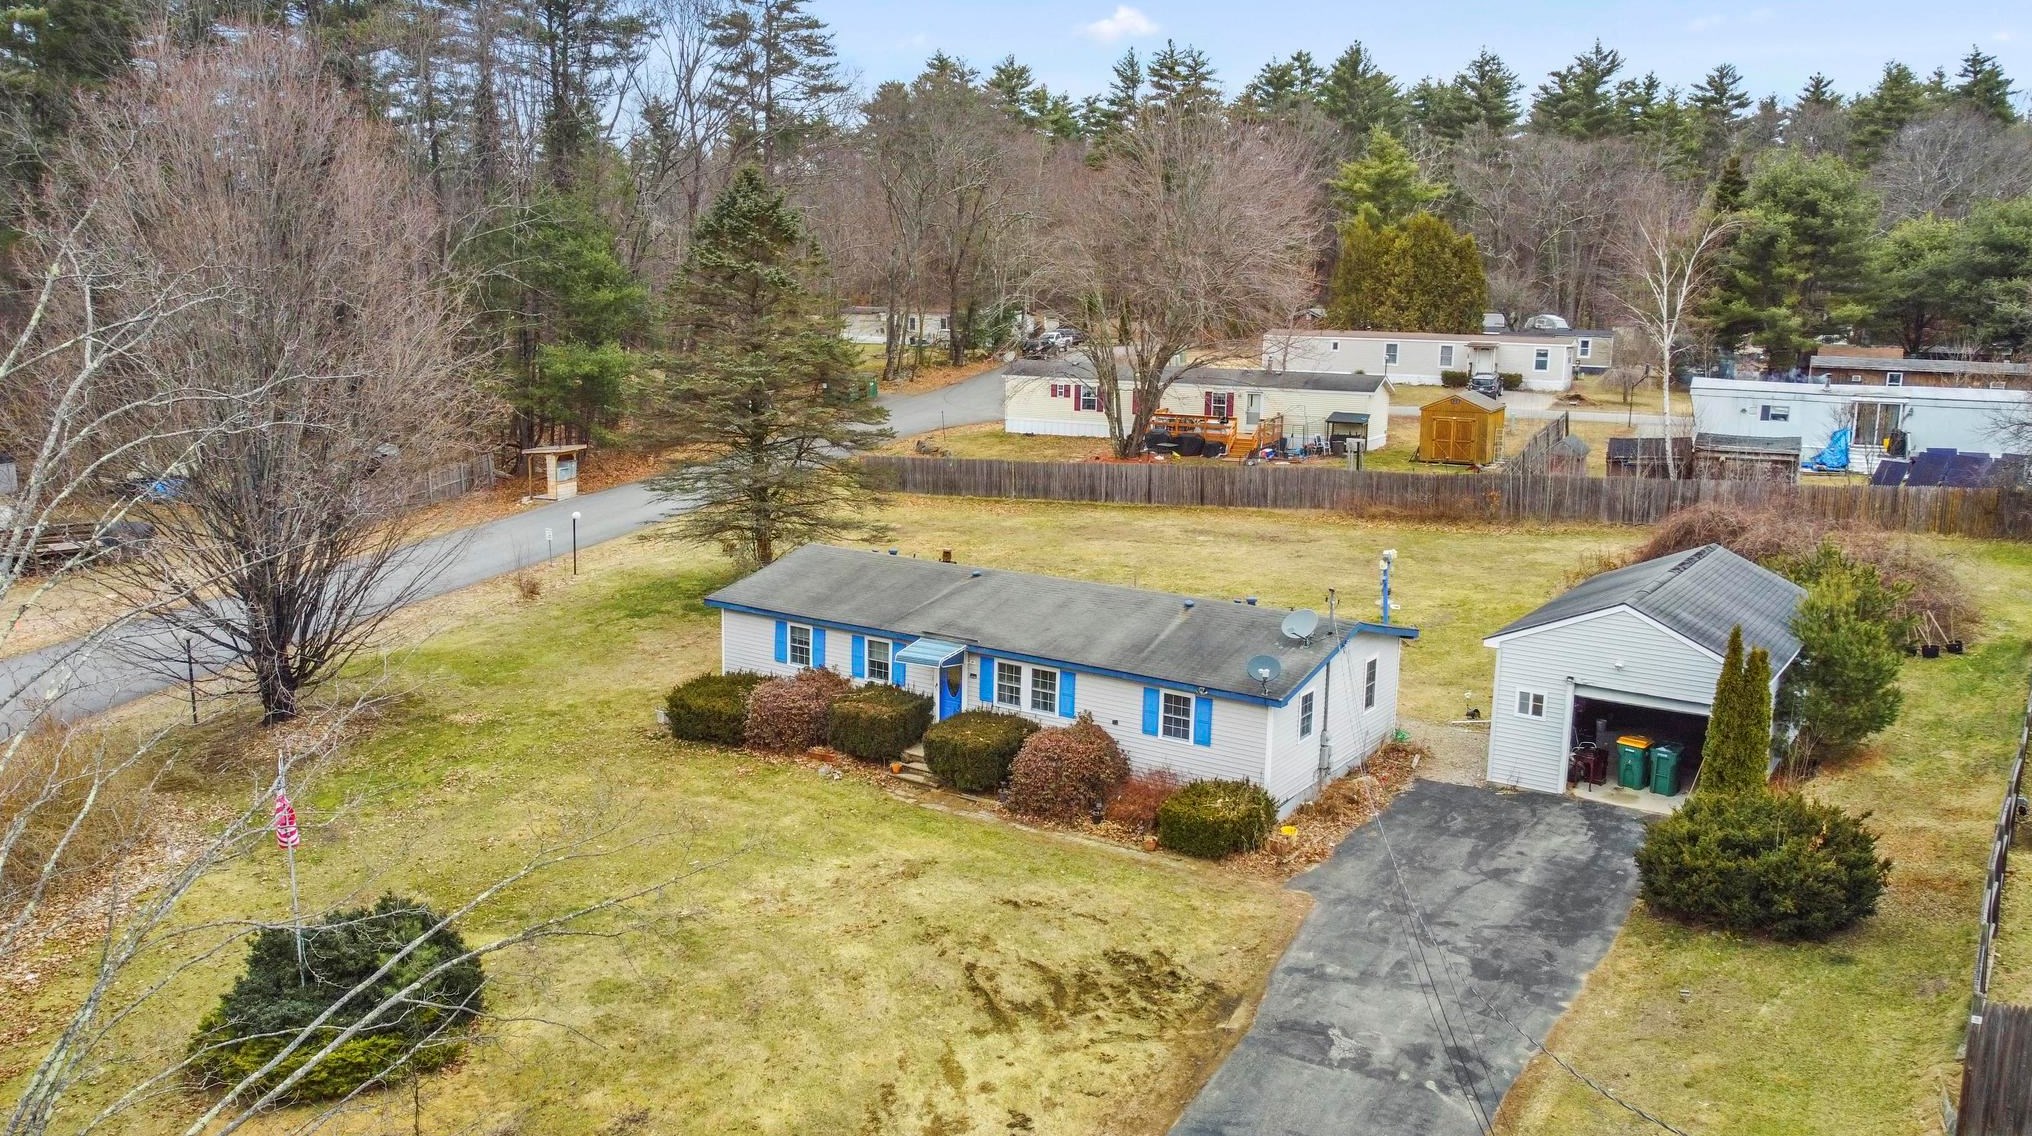 50 Whitehouse Rd, Rochester, NH 03867